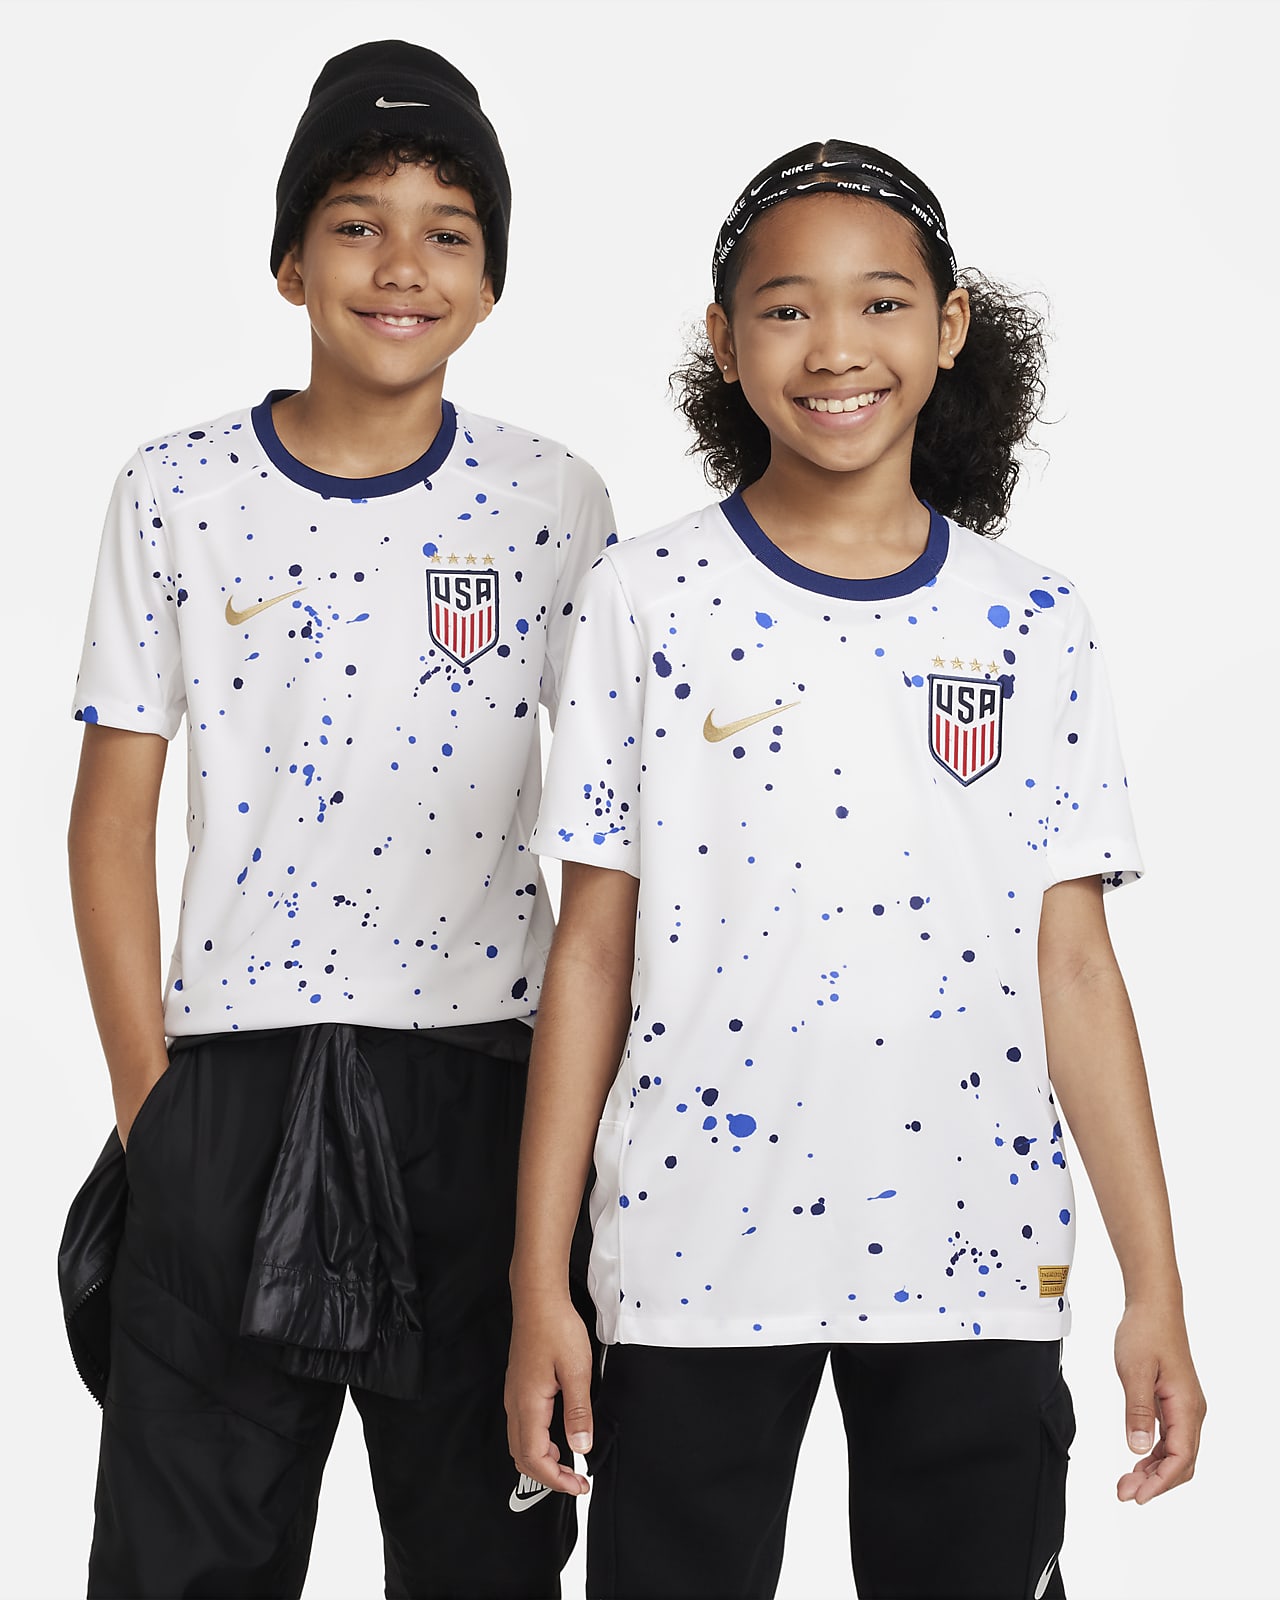 Buy Usa Soccer Jersey Online In India -  India